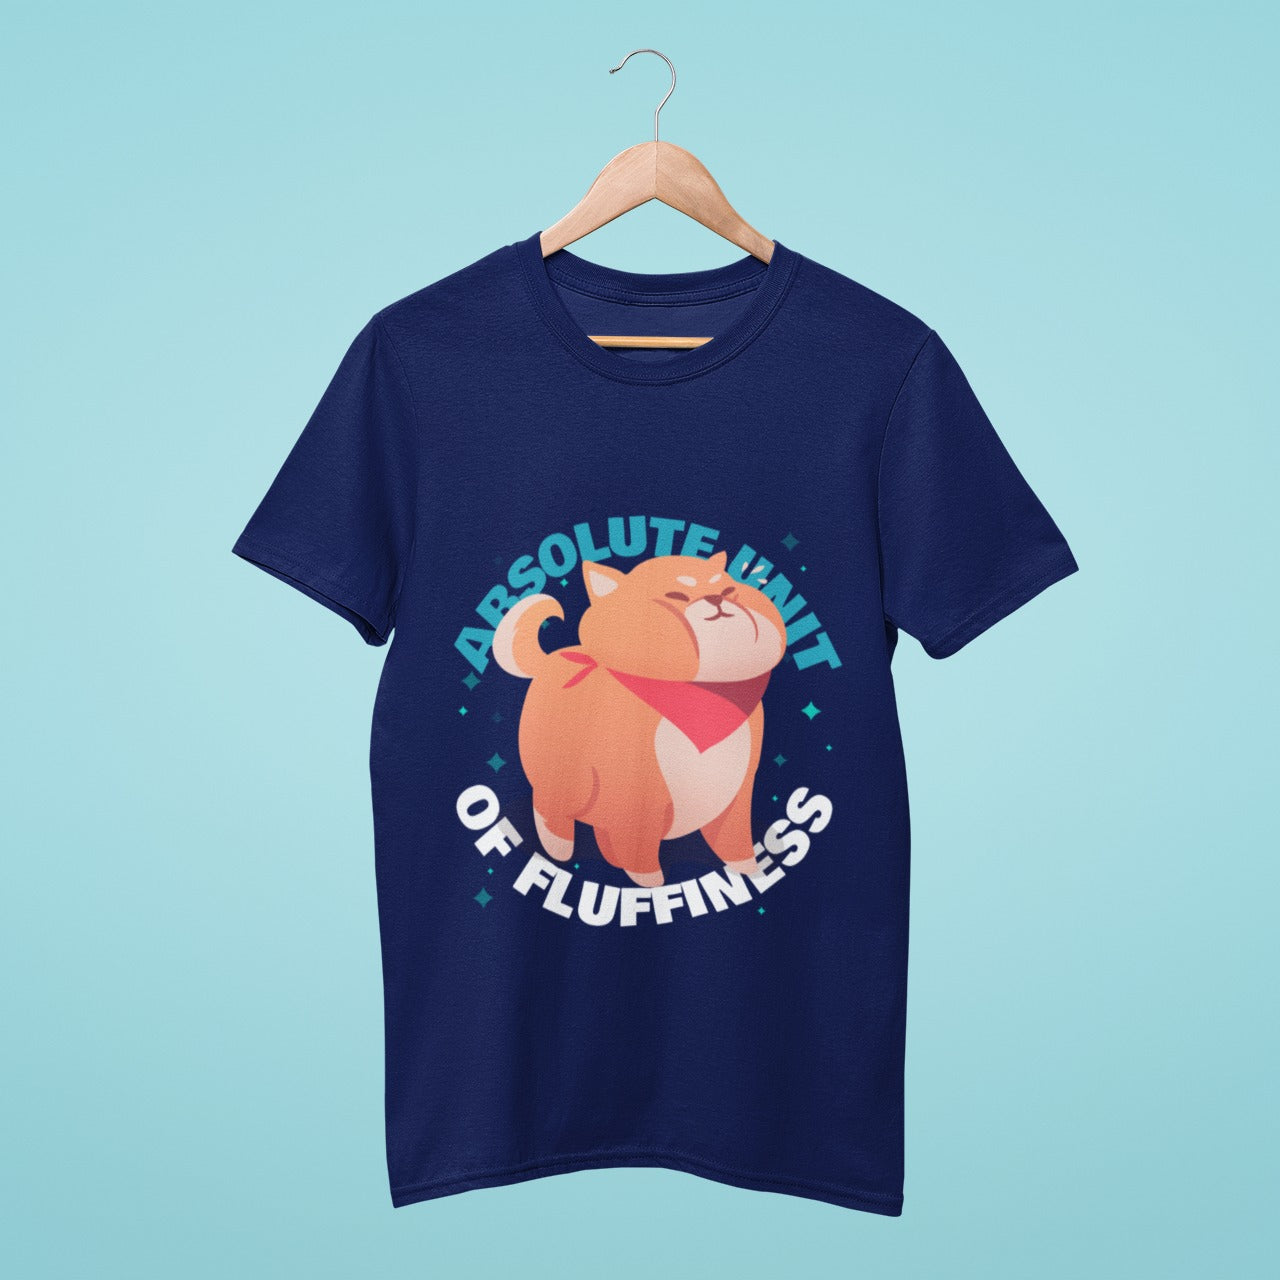 This navy blue t-shirt boasts the title "Absolute Unit of Fluffiness" accompanied by a charming graphic of a chubby and fluffy dog. With its soft and comfortable fabric, this tee is perfect for dog lovers looking to add some extra cuteness to their wardrobe.